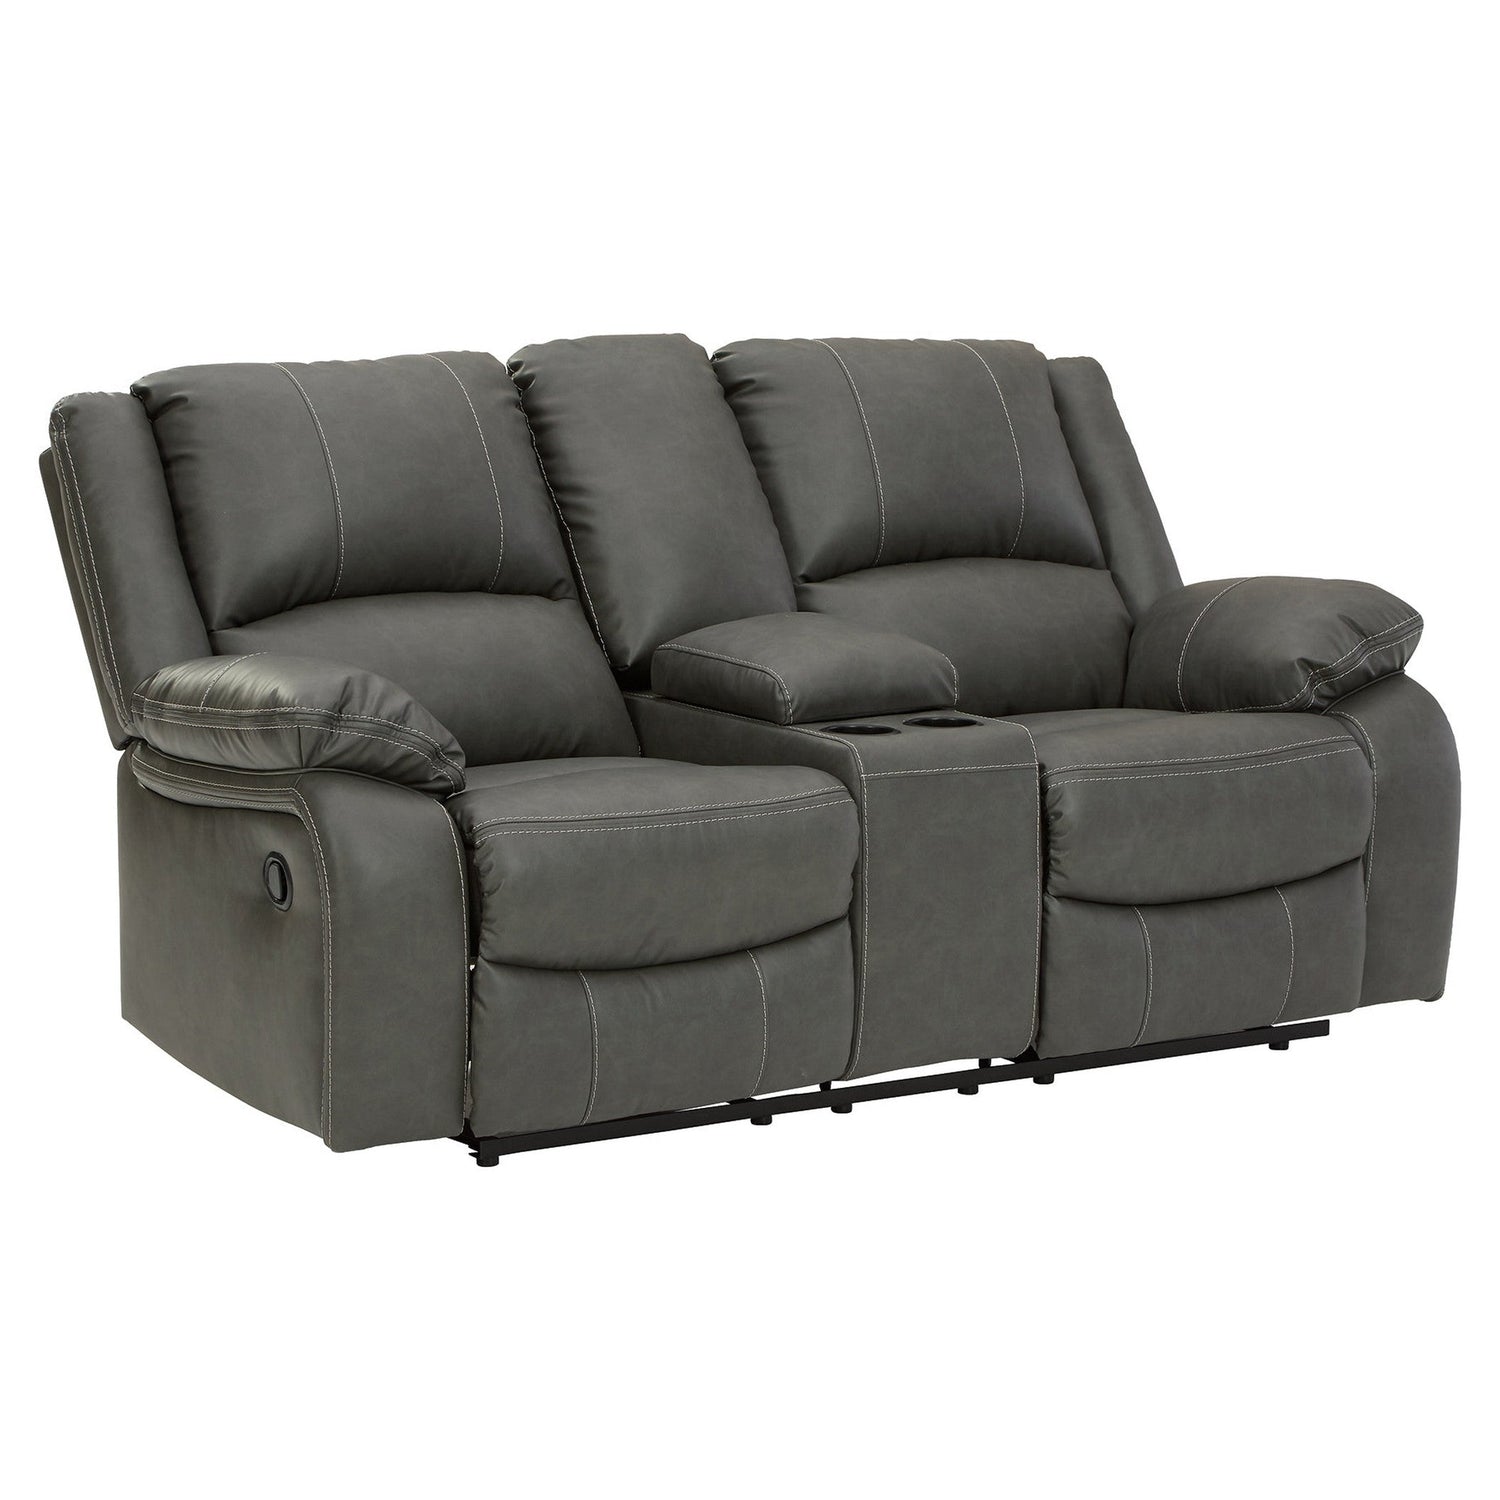 Calderwell Reclining Loveseat with Console Ash-7710394